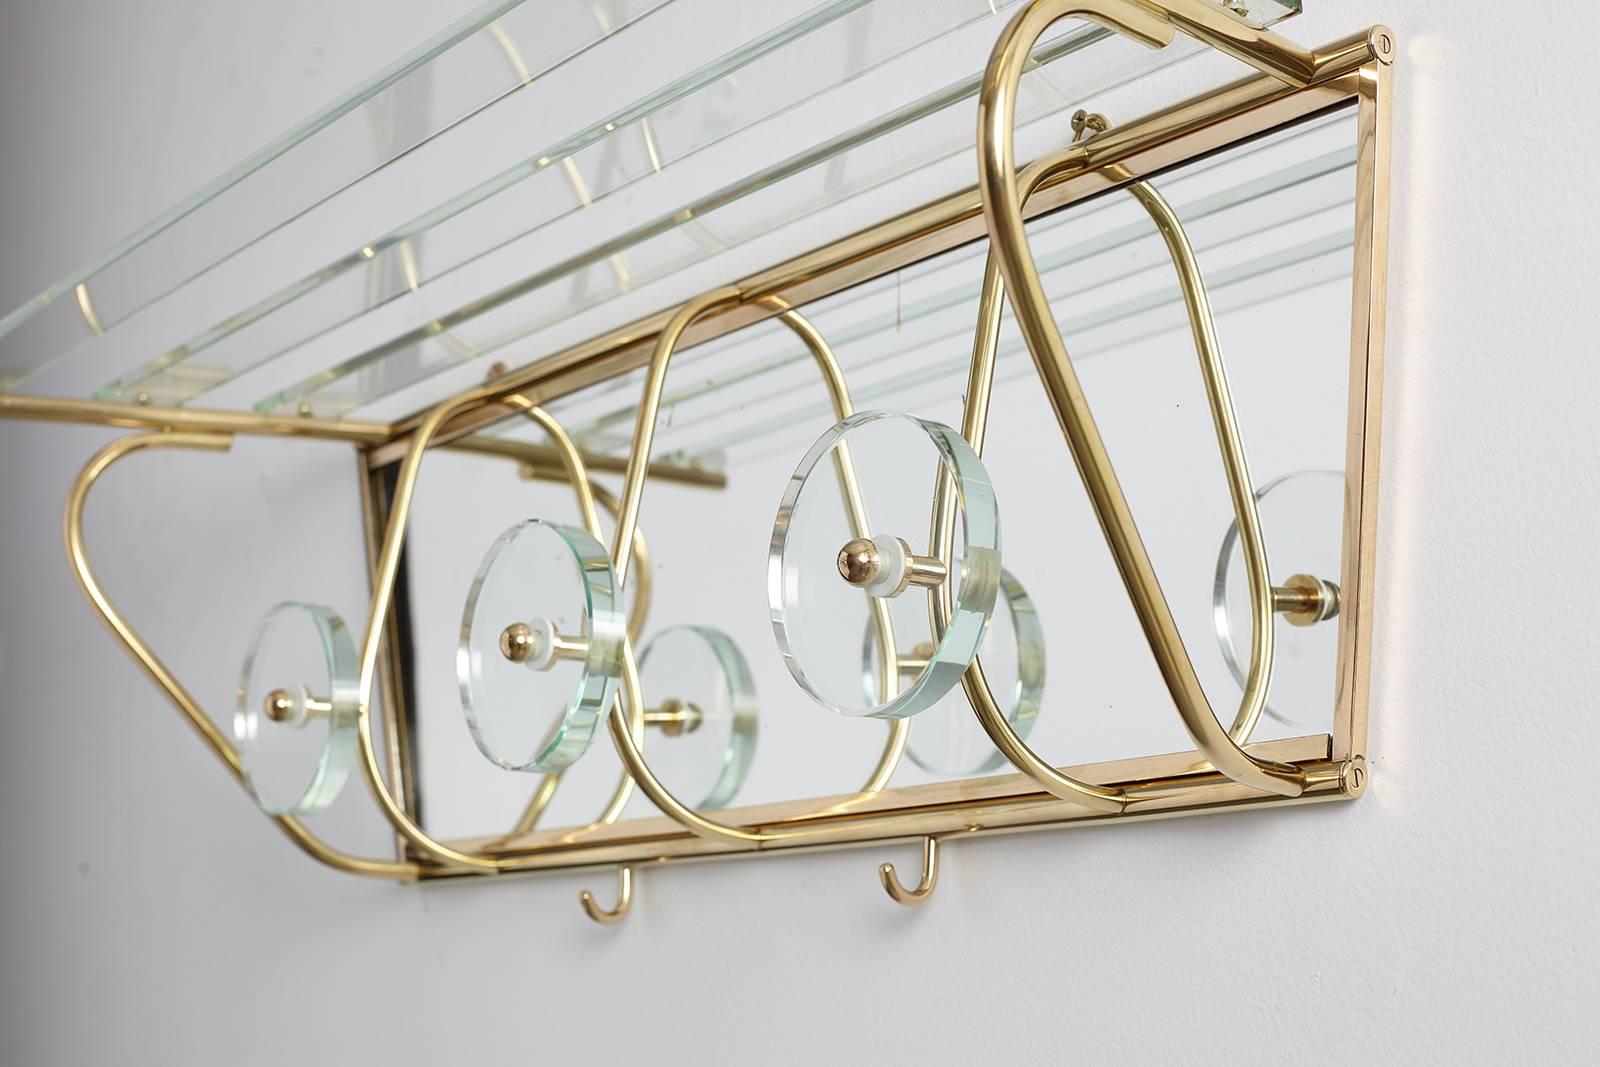 Beautiful mirrored coat rack in the style of Fontana Arte and Cristal Art. 

Delicate slatted glass shelf rods and four hooks provide an elegant and proper source for storage. Two brass hooks for additional storage on base of rack.